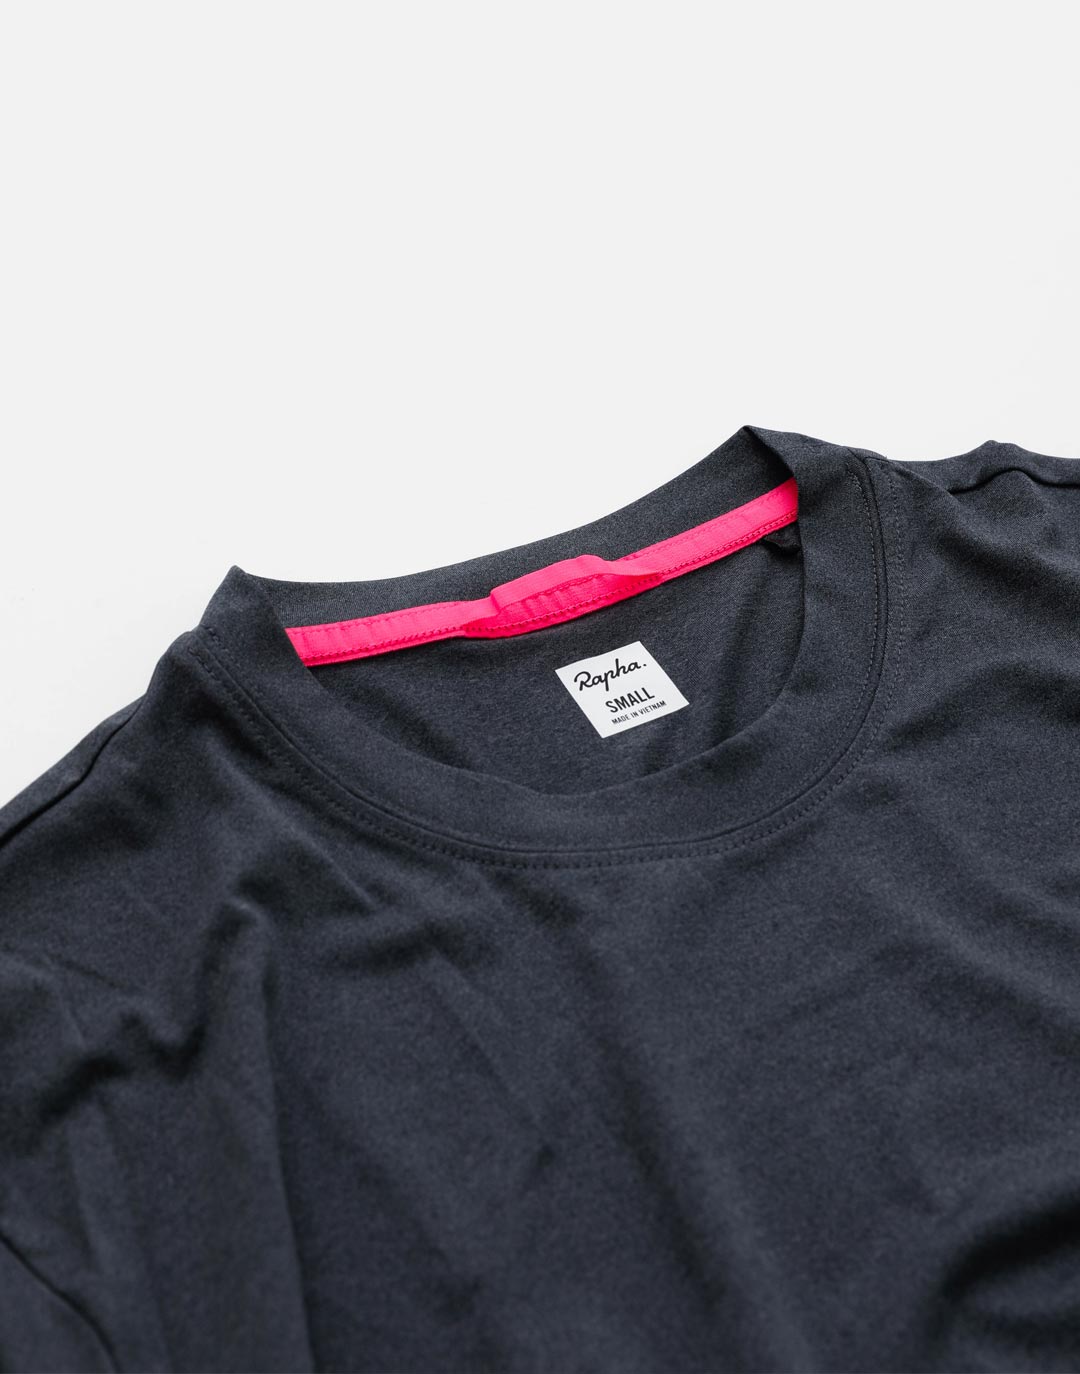 Rapha Cycling Club T – PAPERSKY STORE